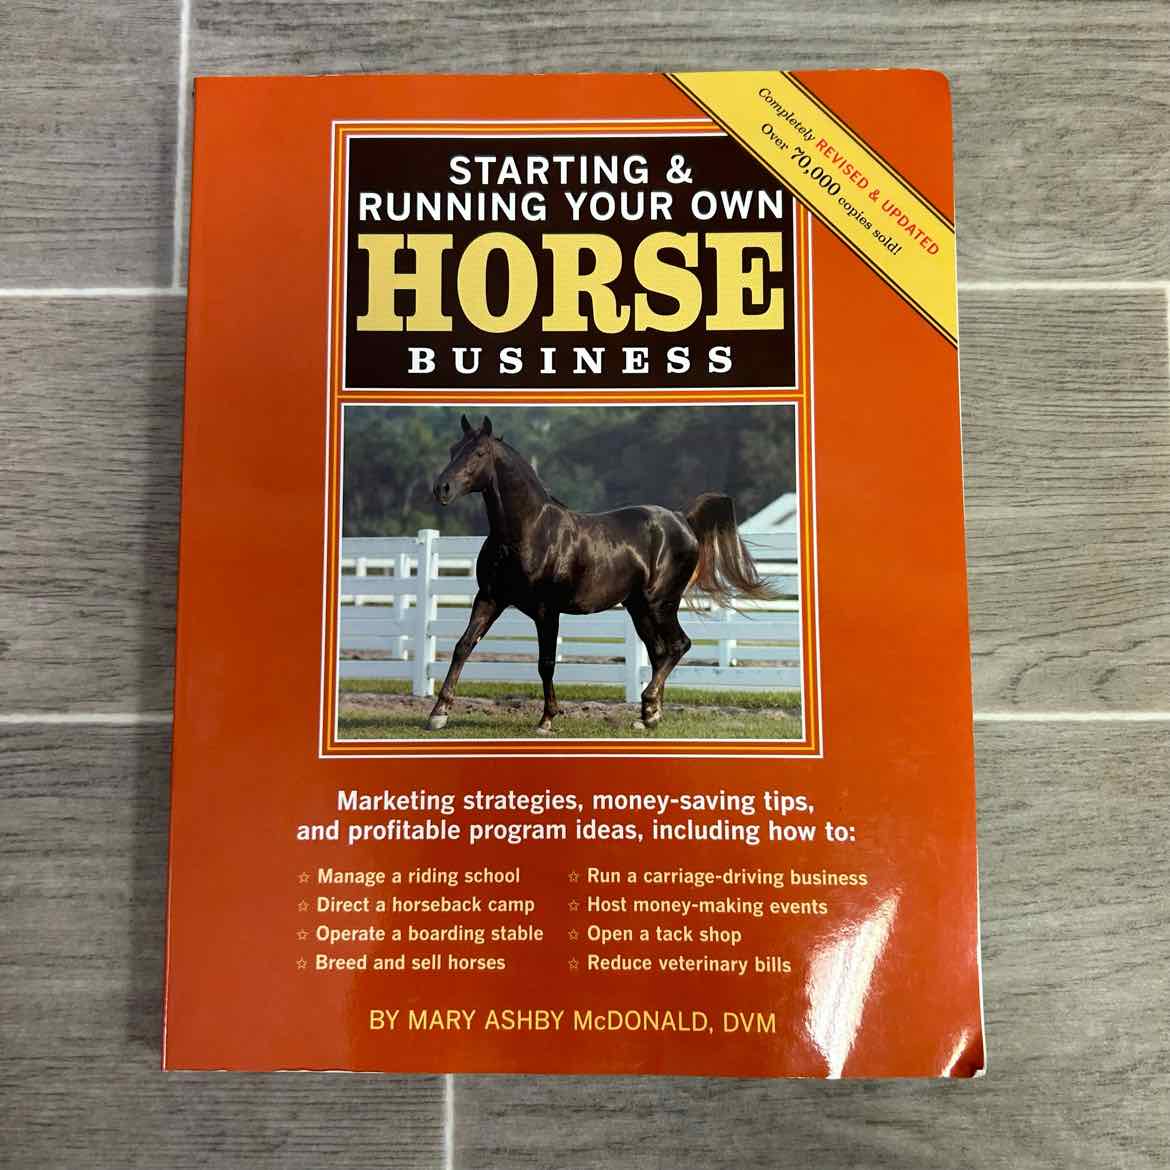 Starting & Running Your Own Horse Business by Mary Ashby McDonald, DVM